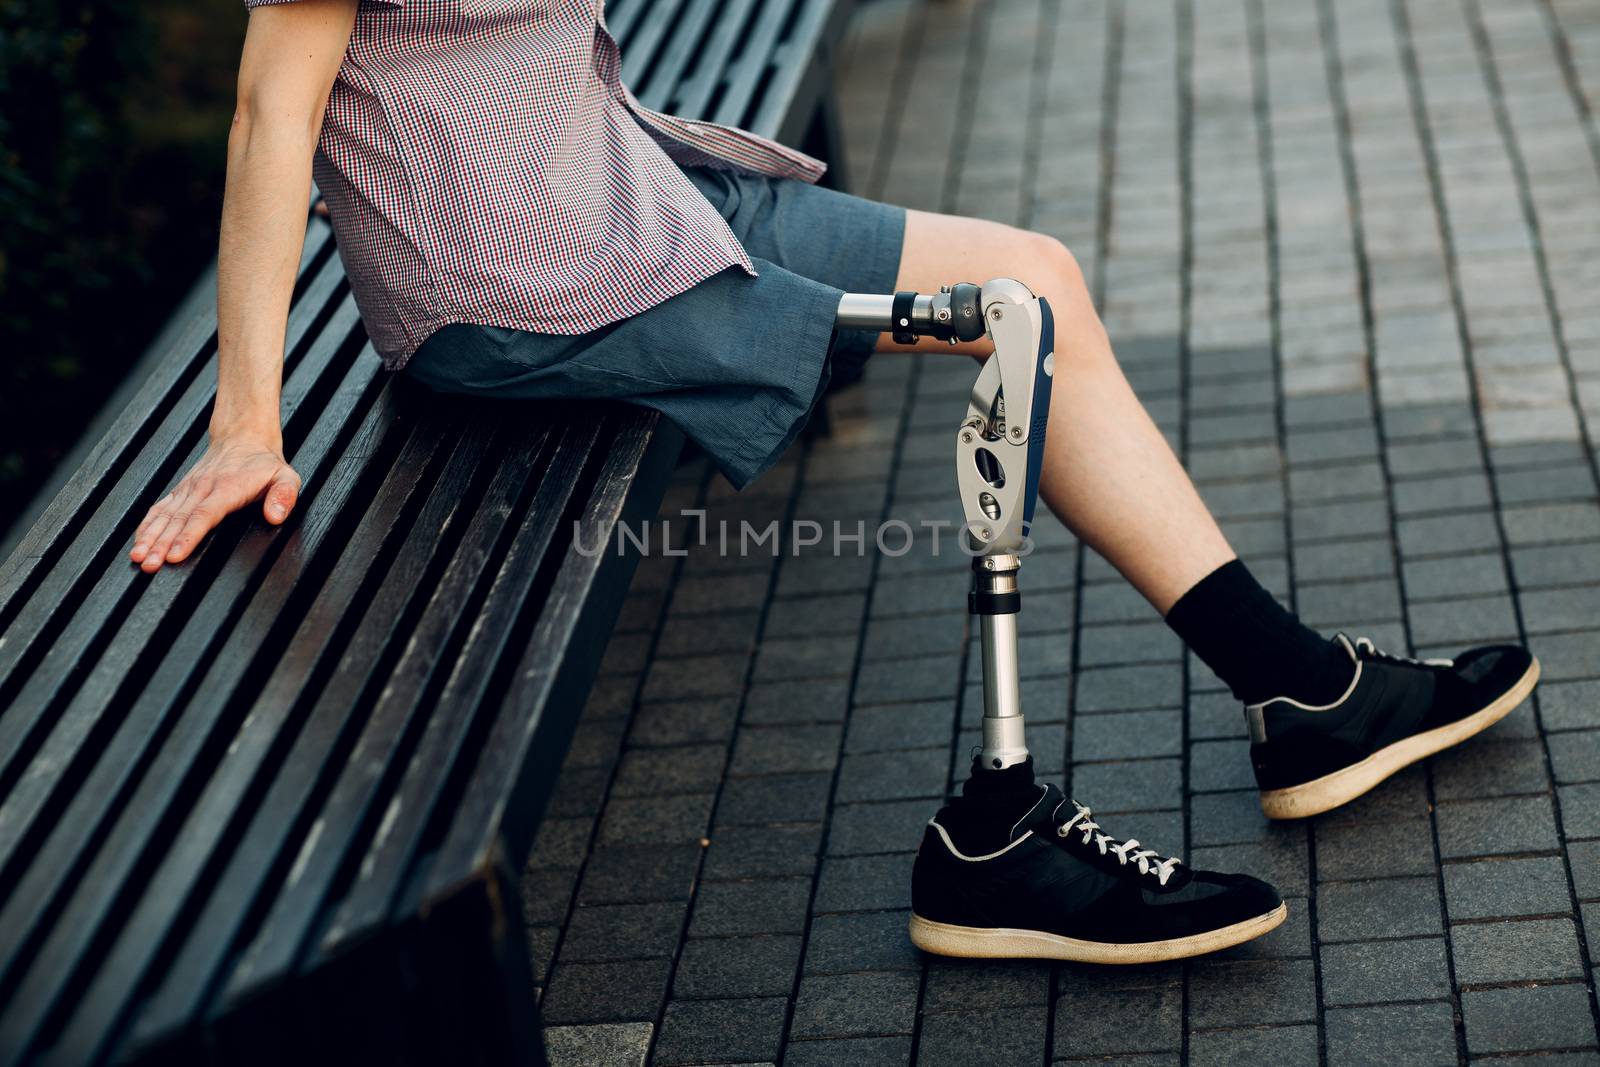 Disabled young man with foot prosthesis sitting outdoor